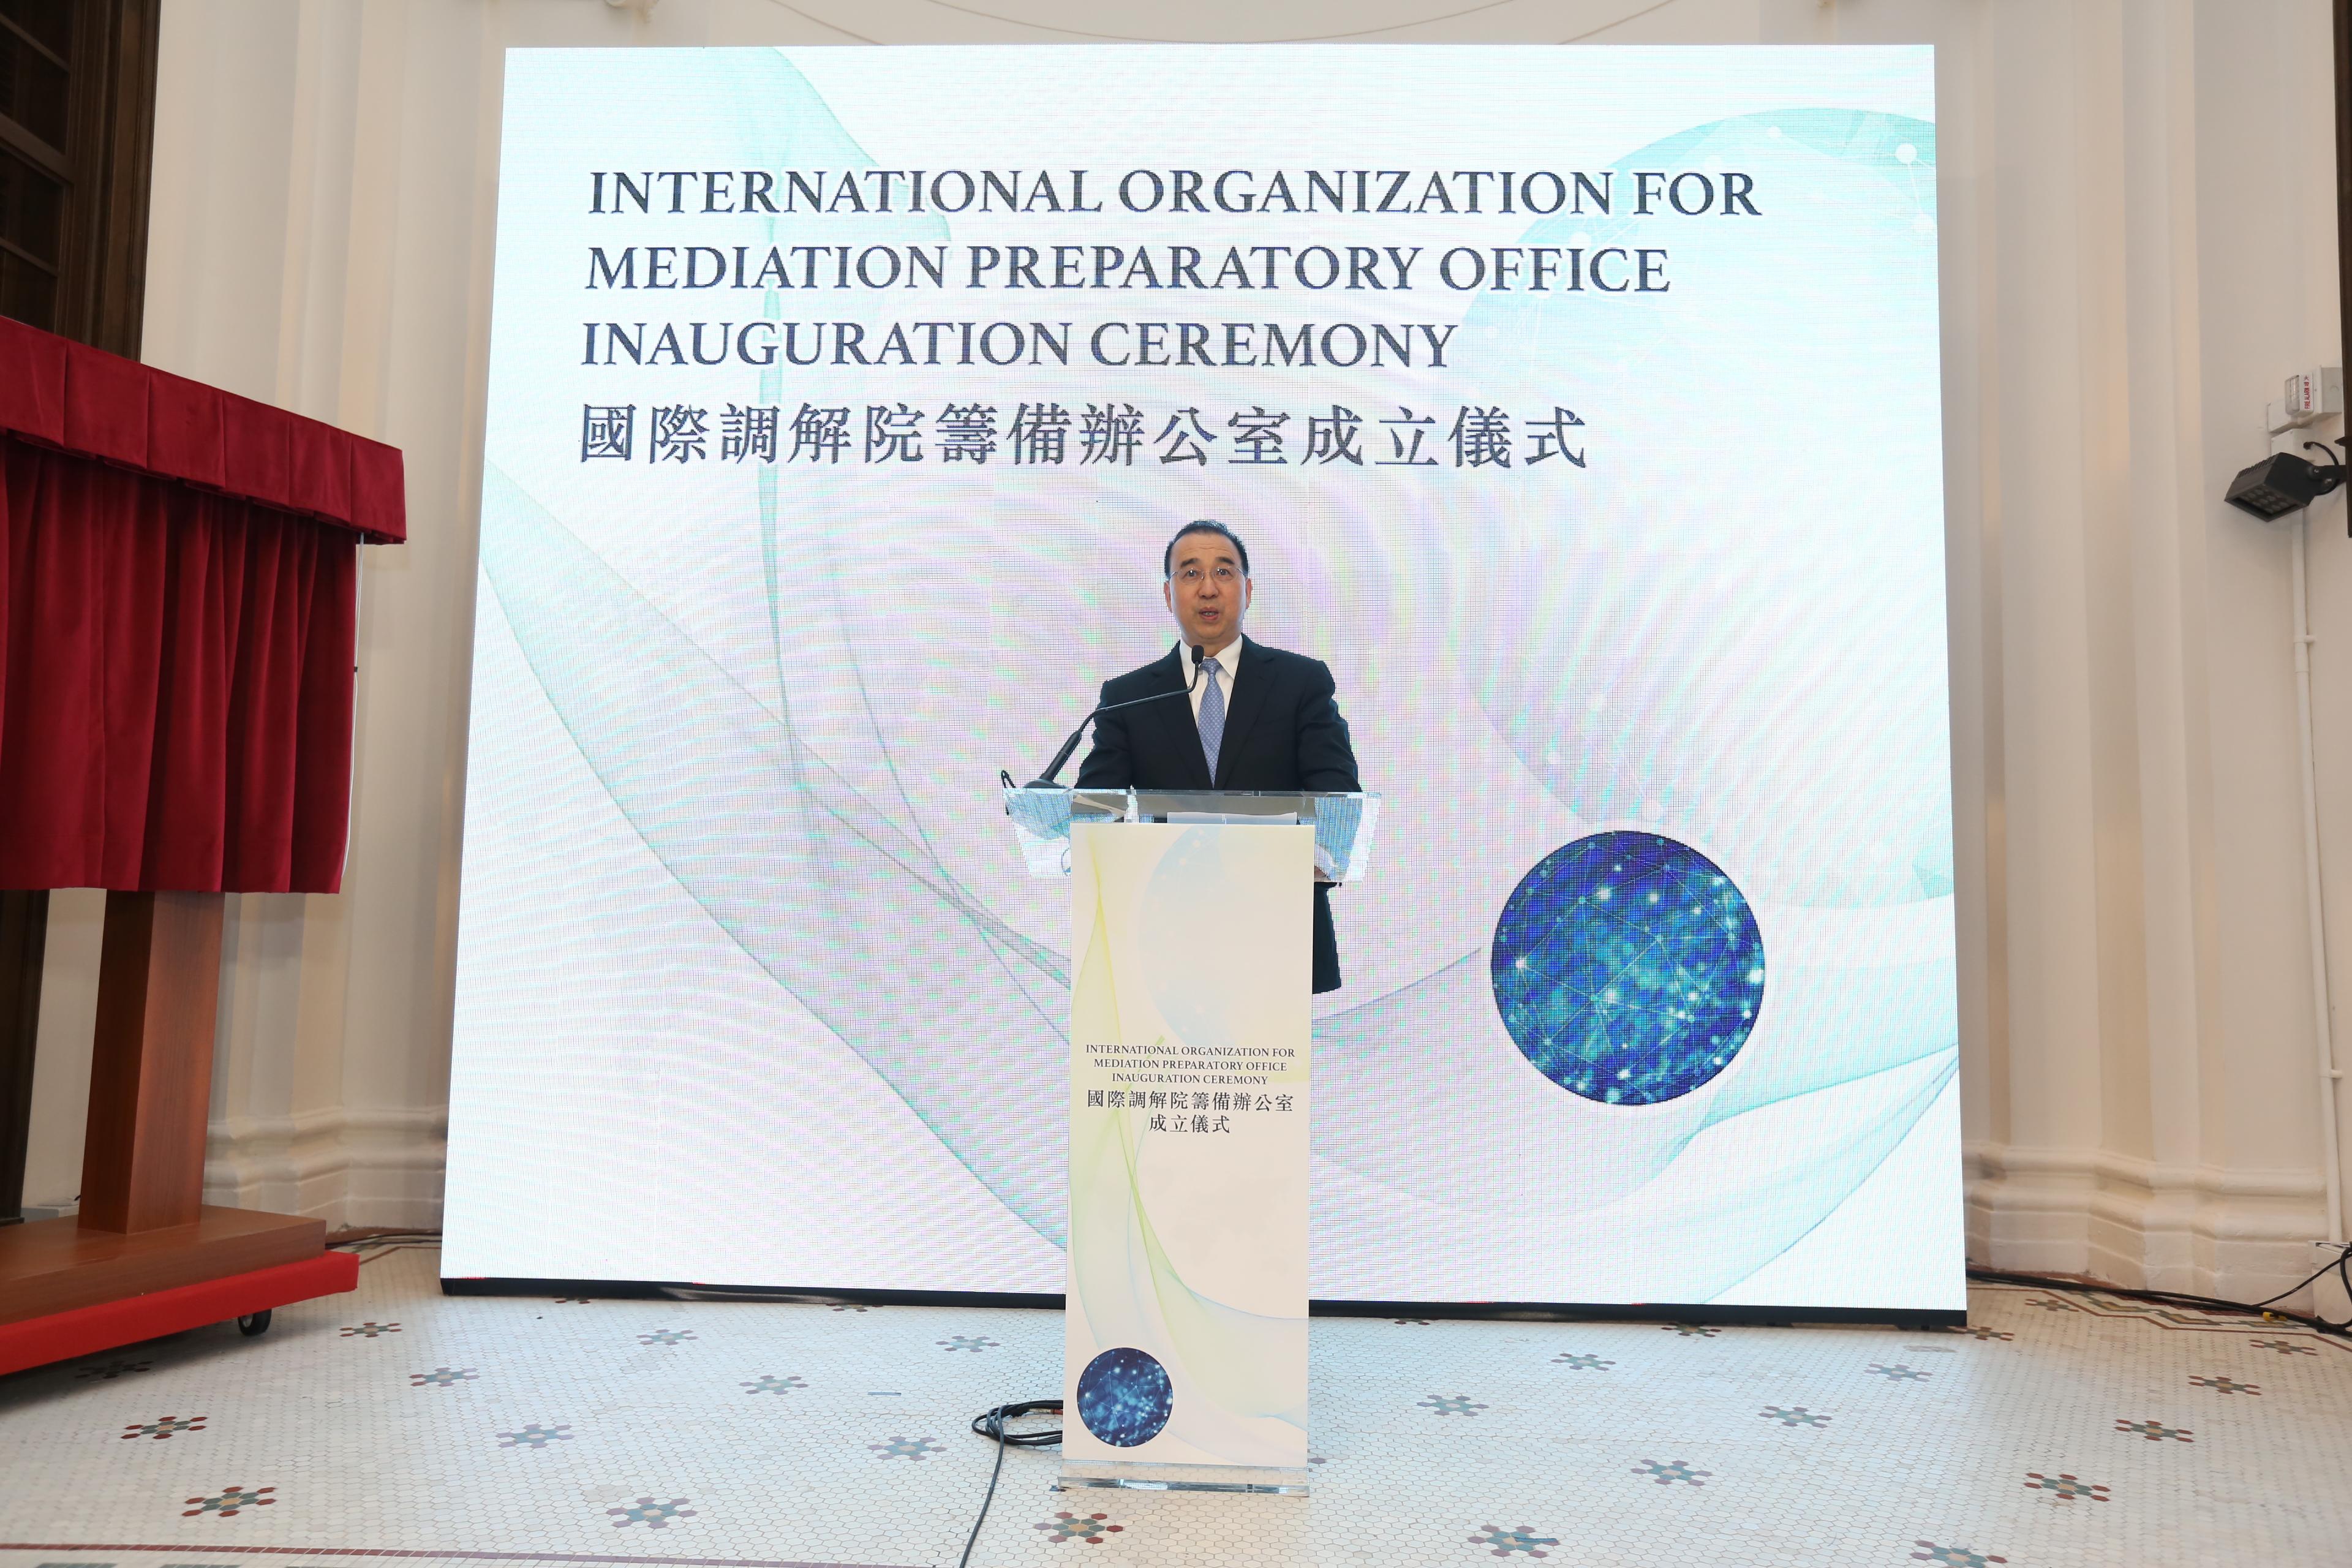 With strong support from the Central People's Government, the inauguration ceremony for the International Organization for Mediation Preparatory Office was held today (February 16) at the Hong Kong Legal Hub. Photo shows the Commissioner of the Ministry of Foreign Affairs in the Hong Kong Special Administrative Region, Mr Liu Guangyuan, delivering a speech at the ceremony.